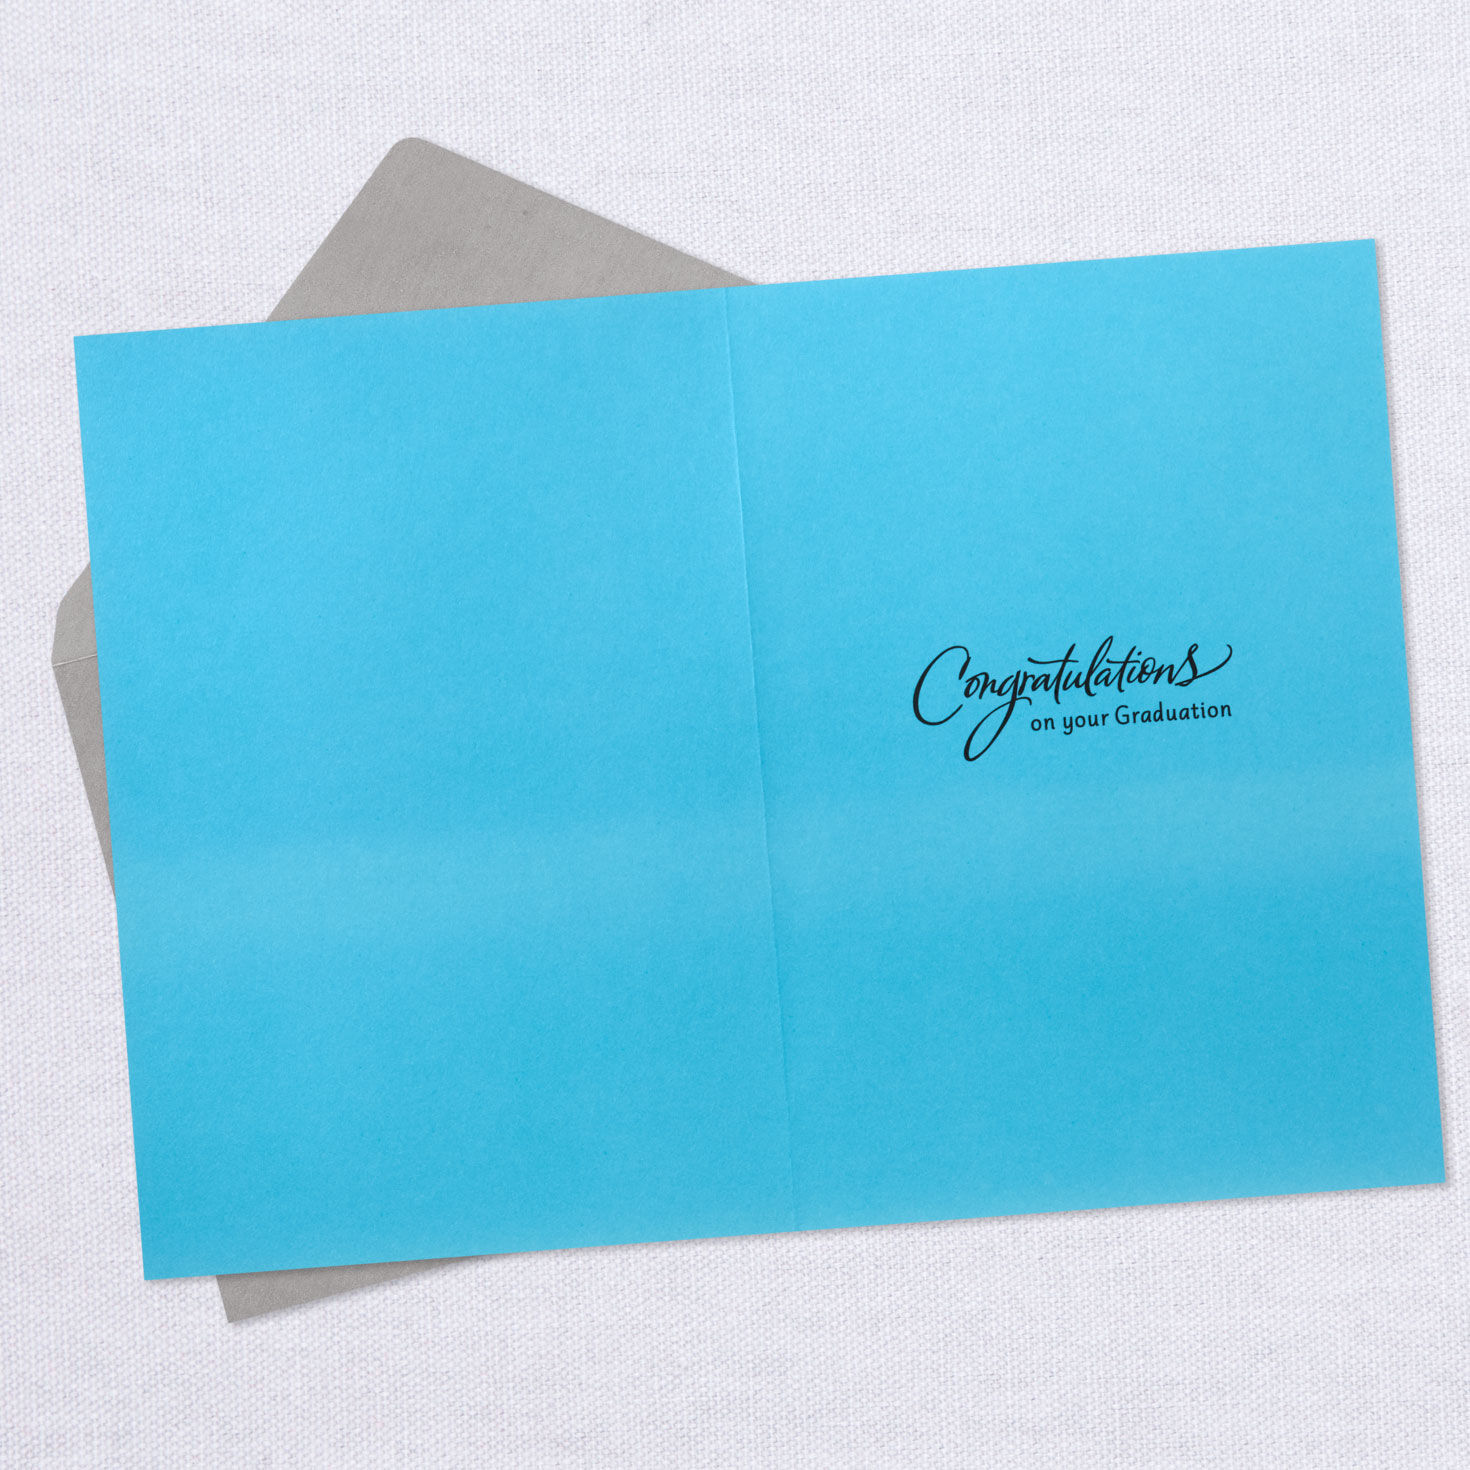 NEW Graduation Greeting Card & Envelope for a SPECIAL GODDAUGHTER Hallmark 